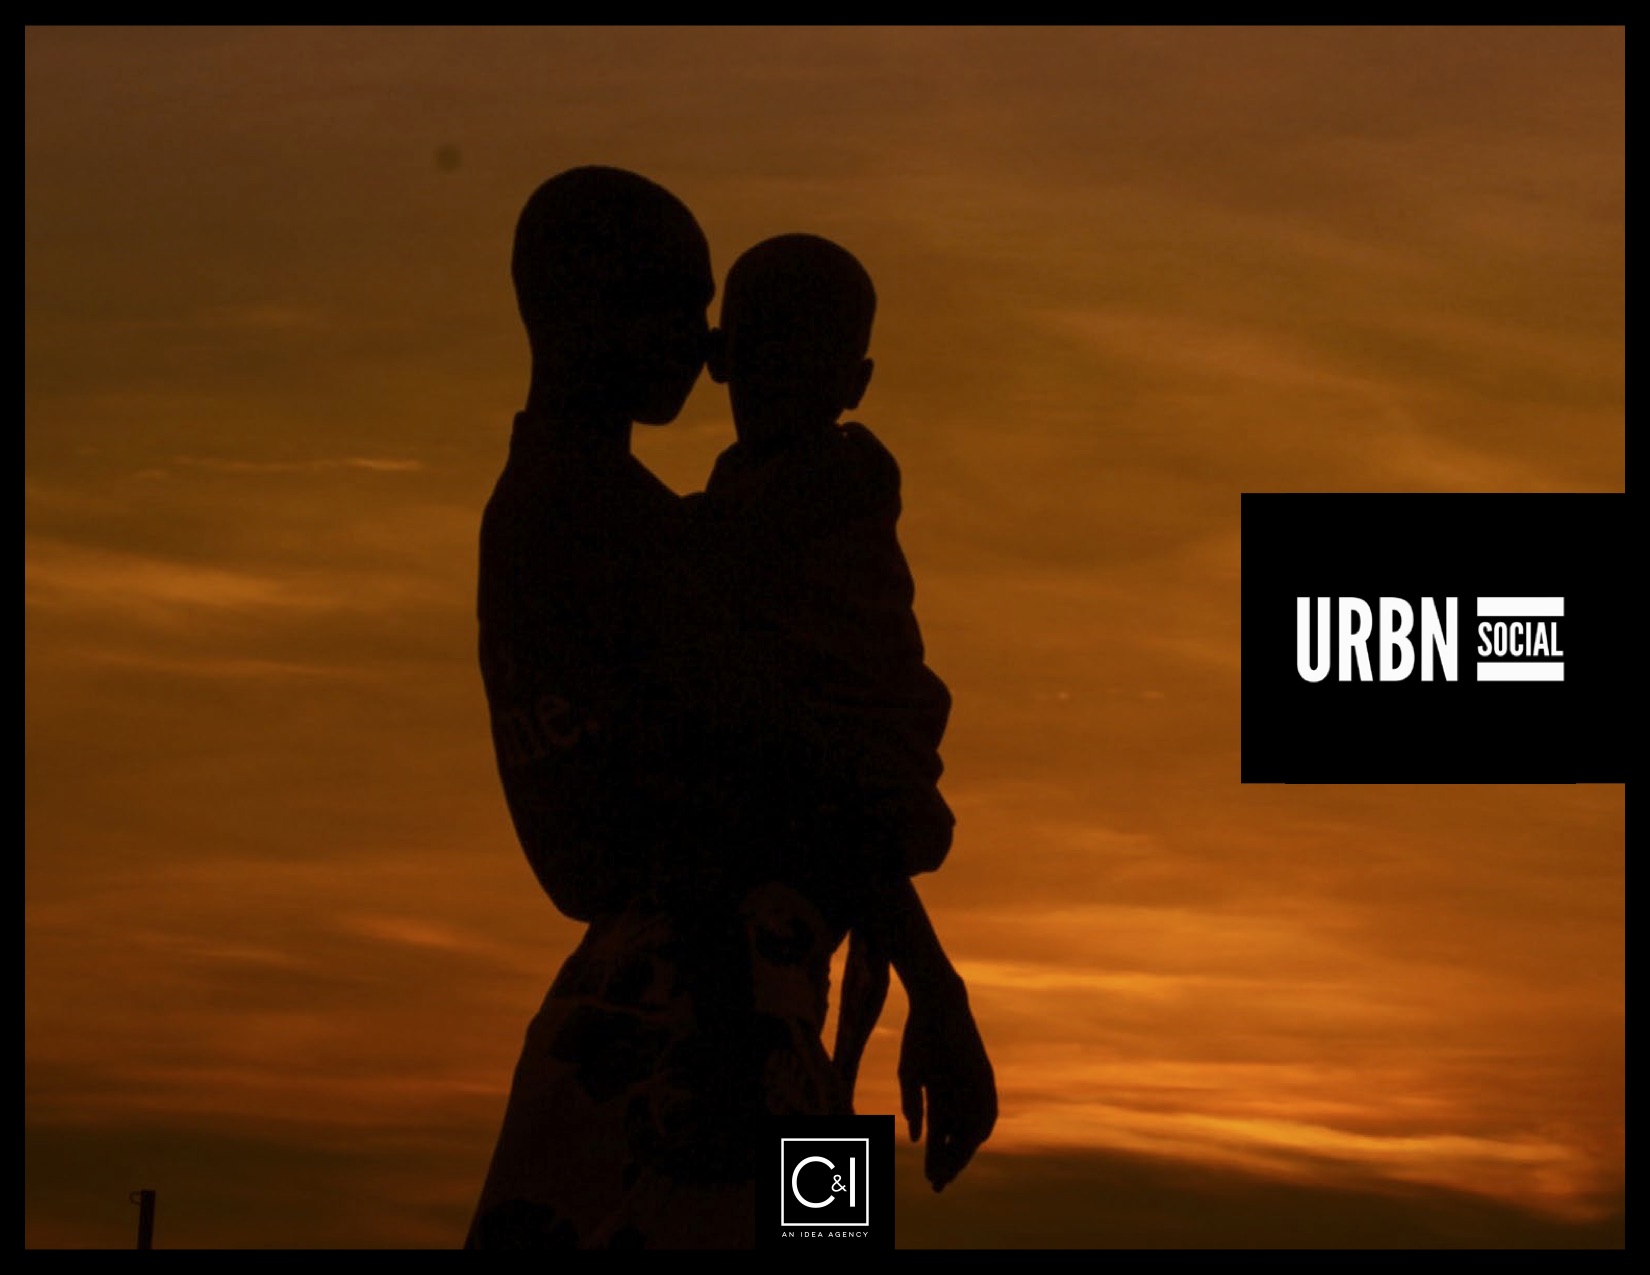 URBN Social Mood Board with a side view of mother and baby in a sunset